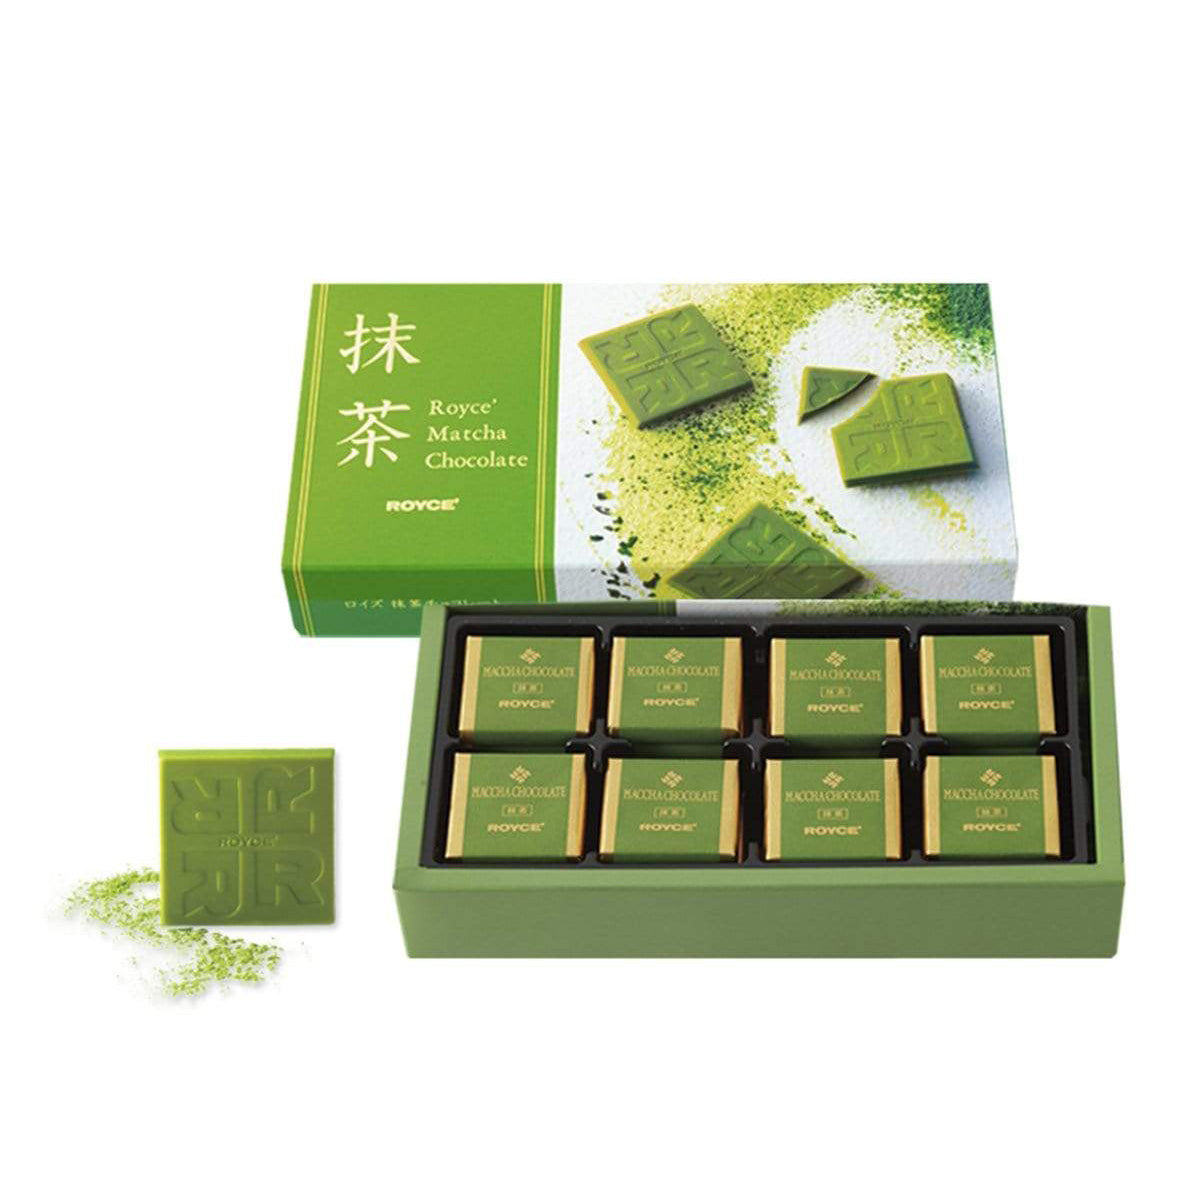 ROYCE' Chocolate - Matcha Chocolate - Image on top center shows a box with a green block with golden text that says ROYCE' Matcha Chocolate ROYCE' with a picture of green chocolates engraved with the letter "R" and the word "ROYCE'". Green box below has individually-wrapped chocolates with gold and green colors with text saying Matcha Chocolate ROYCE'. On the left is a green chocolate square engraved with "R" letters and the word "ROYCE'" with green powder. 